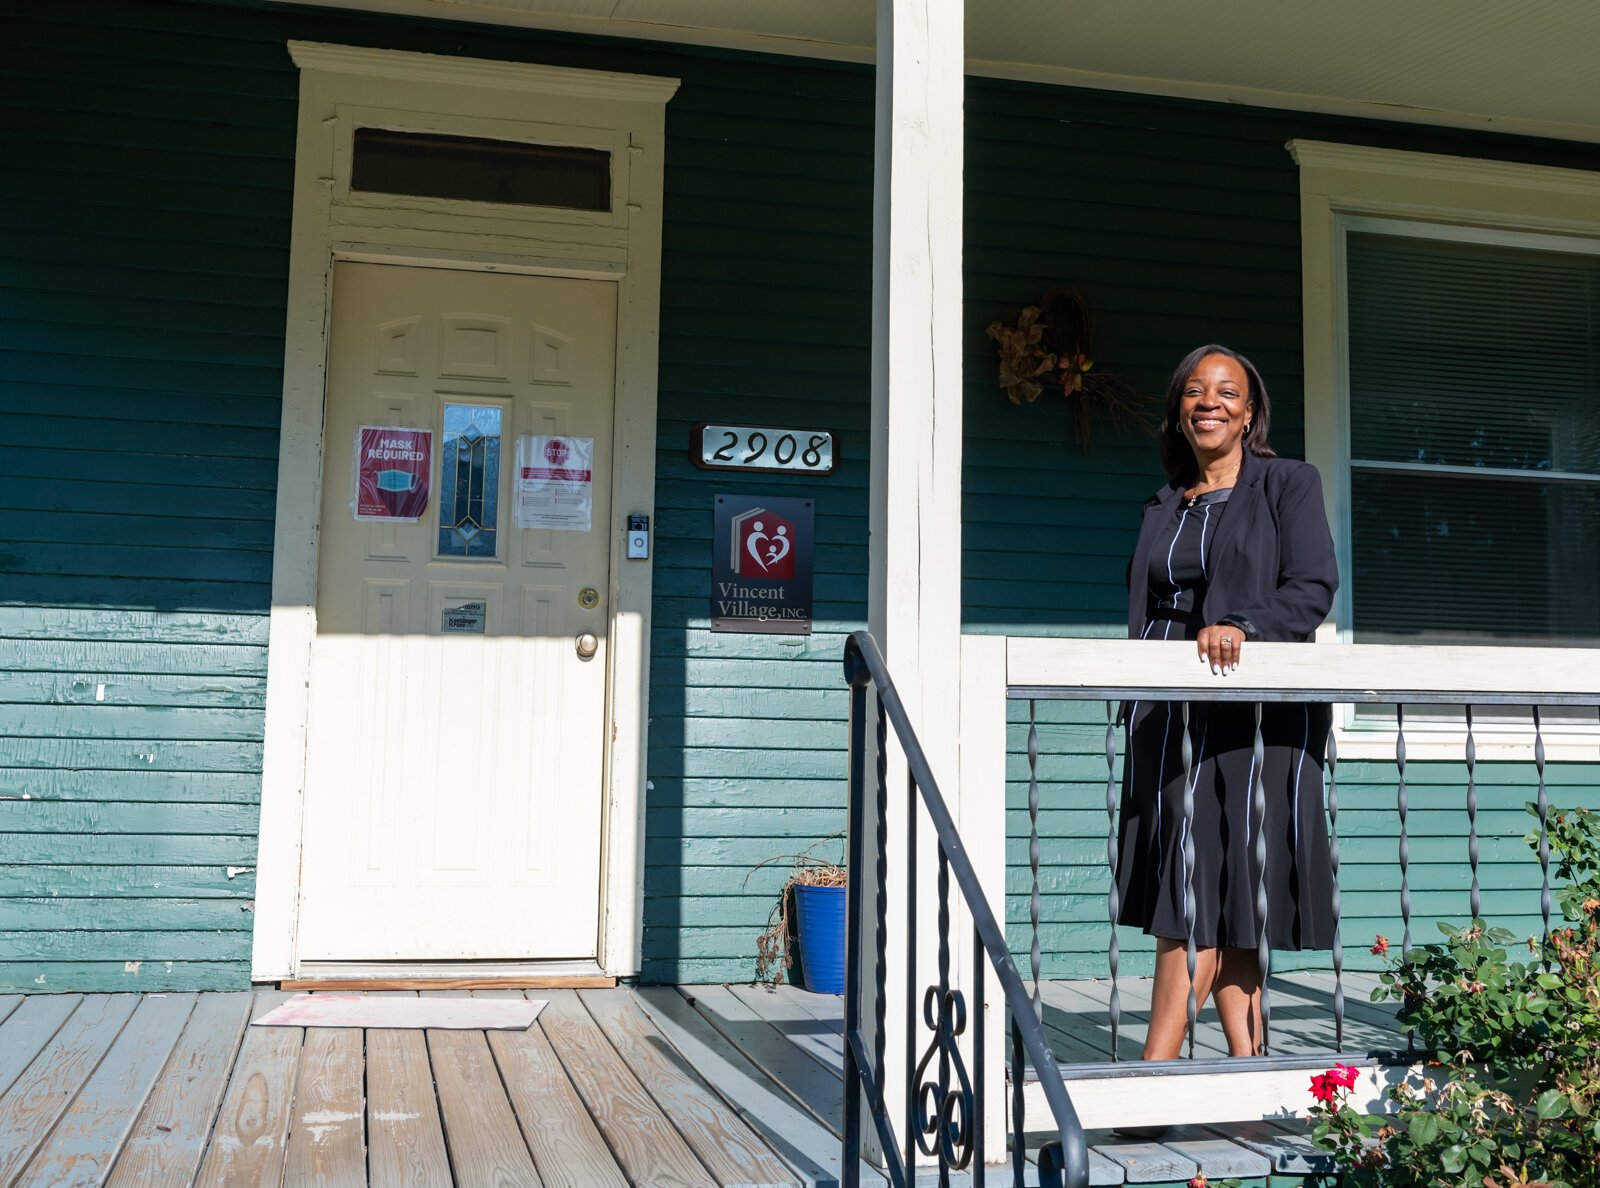 Sharon Tucker, Executive Director of Vincent Village, in front of the building used for COVID-19 relief.